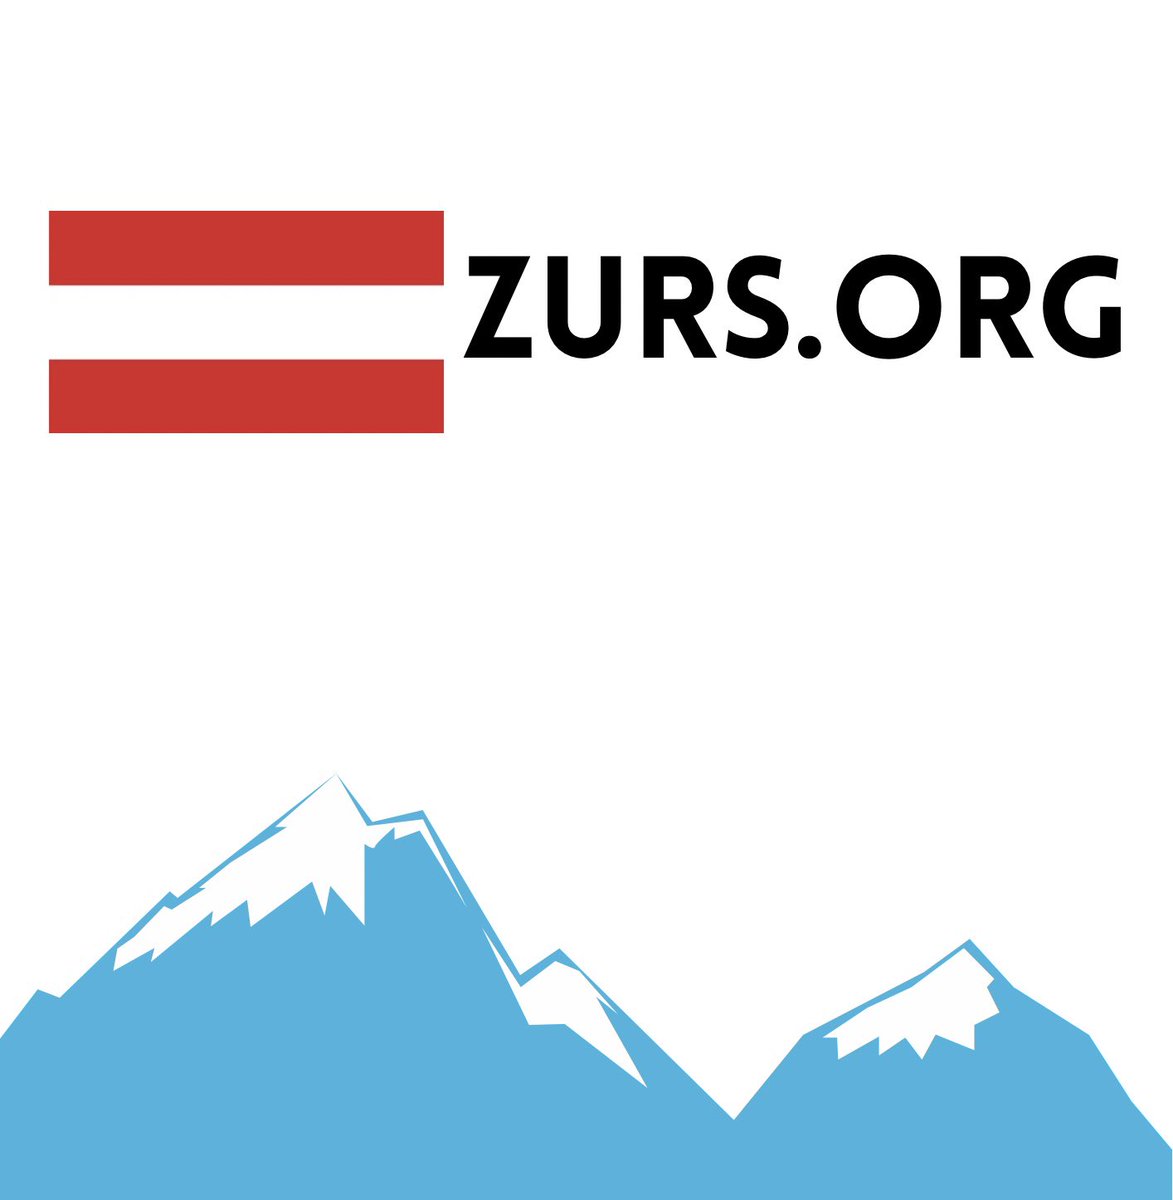 Zurs is a popular holiday destination in Austria.

Zurs.org is up for sale

#domains #domainsforsale #DomainNameForSale #domainnames #austria #holiday #zurs #skijumping #luxury #europe